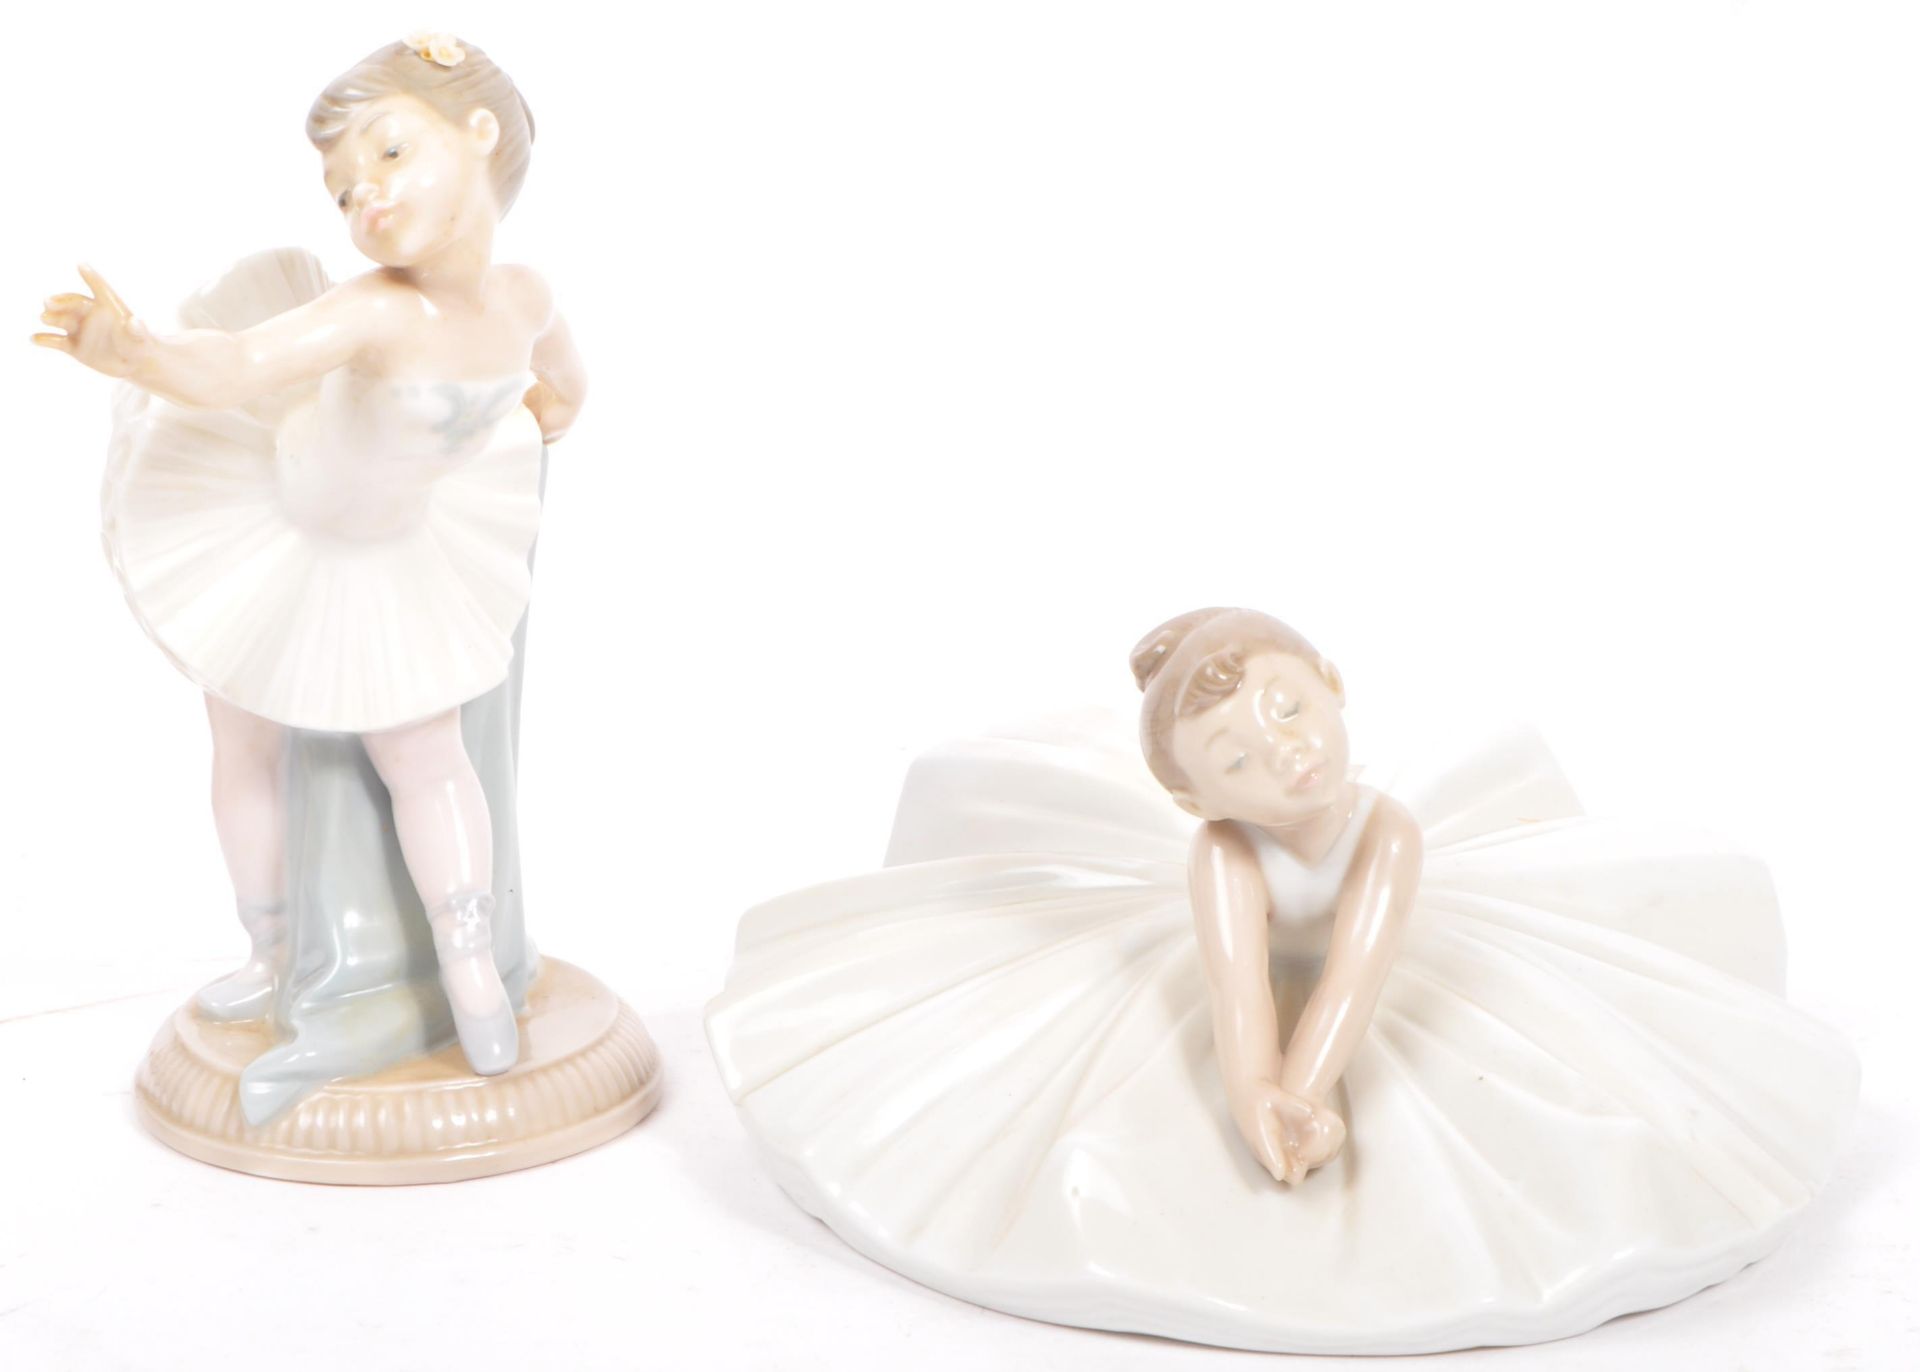 COLLECTION OF NAO PORCELAIN BALLERINA FIGURINES - Image 4 of 8